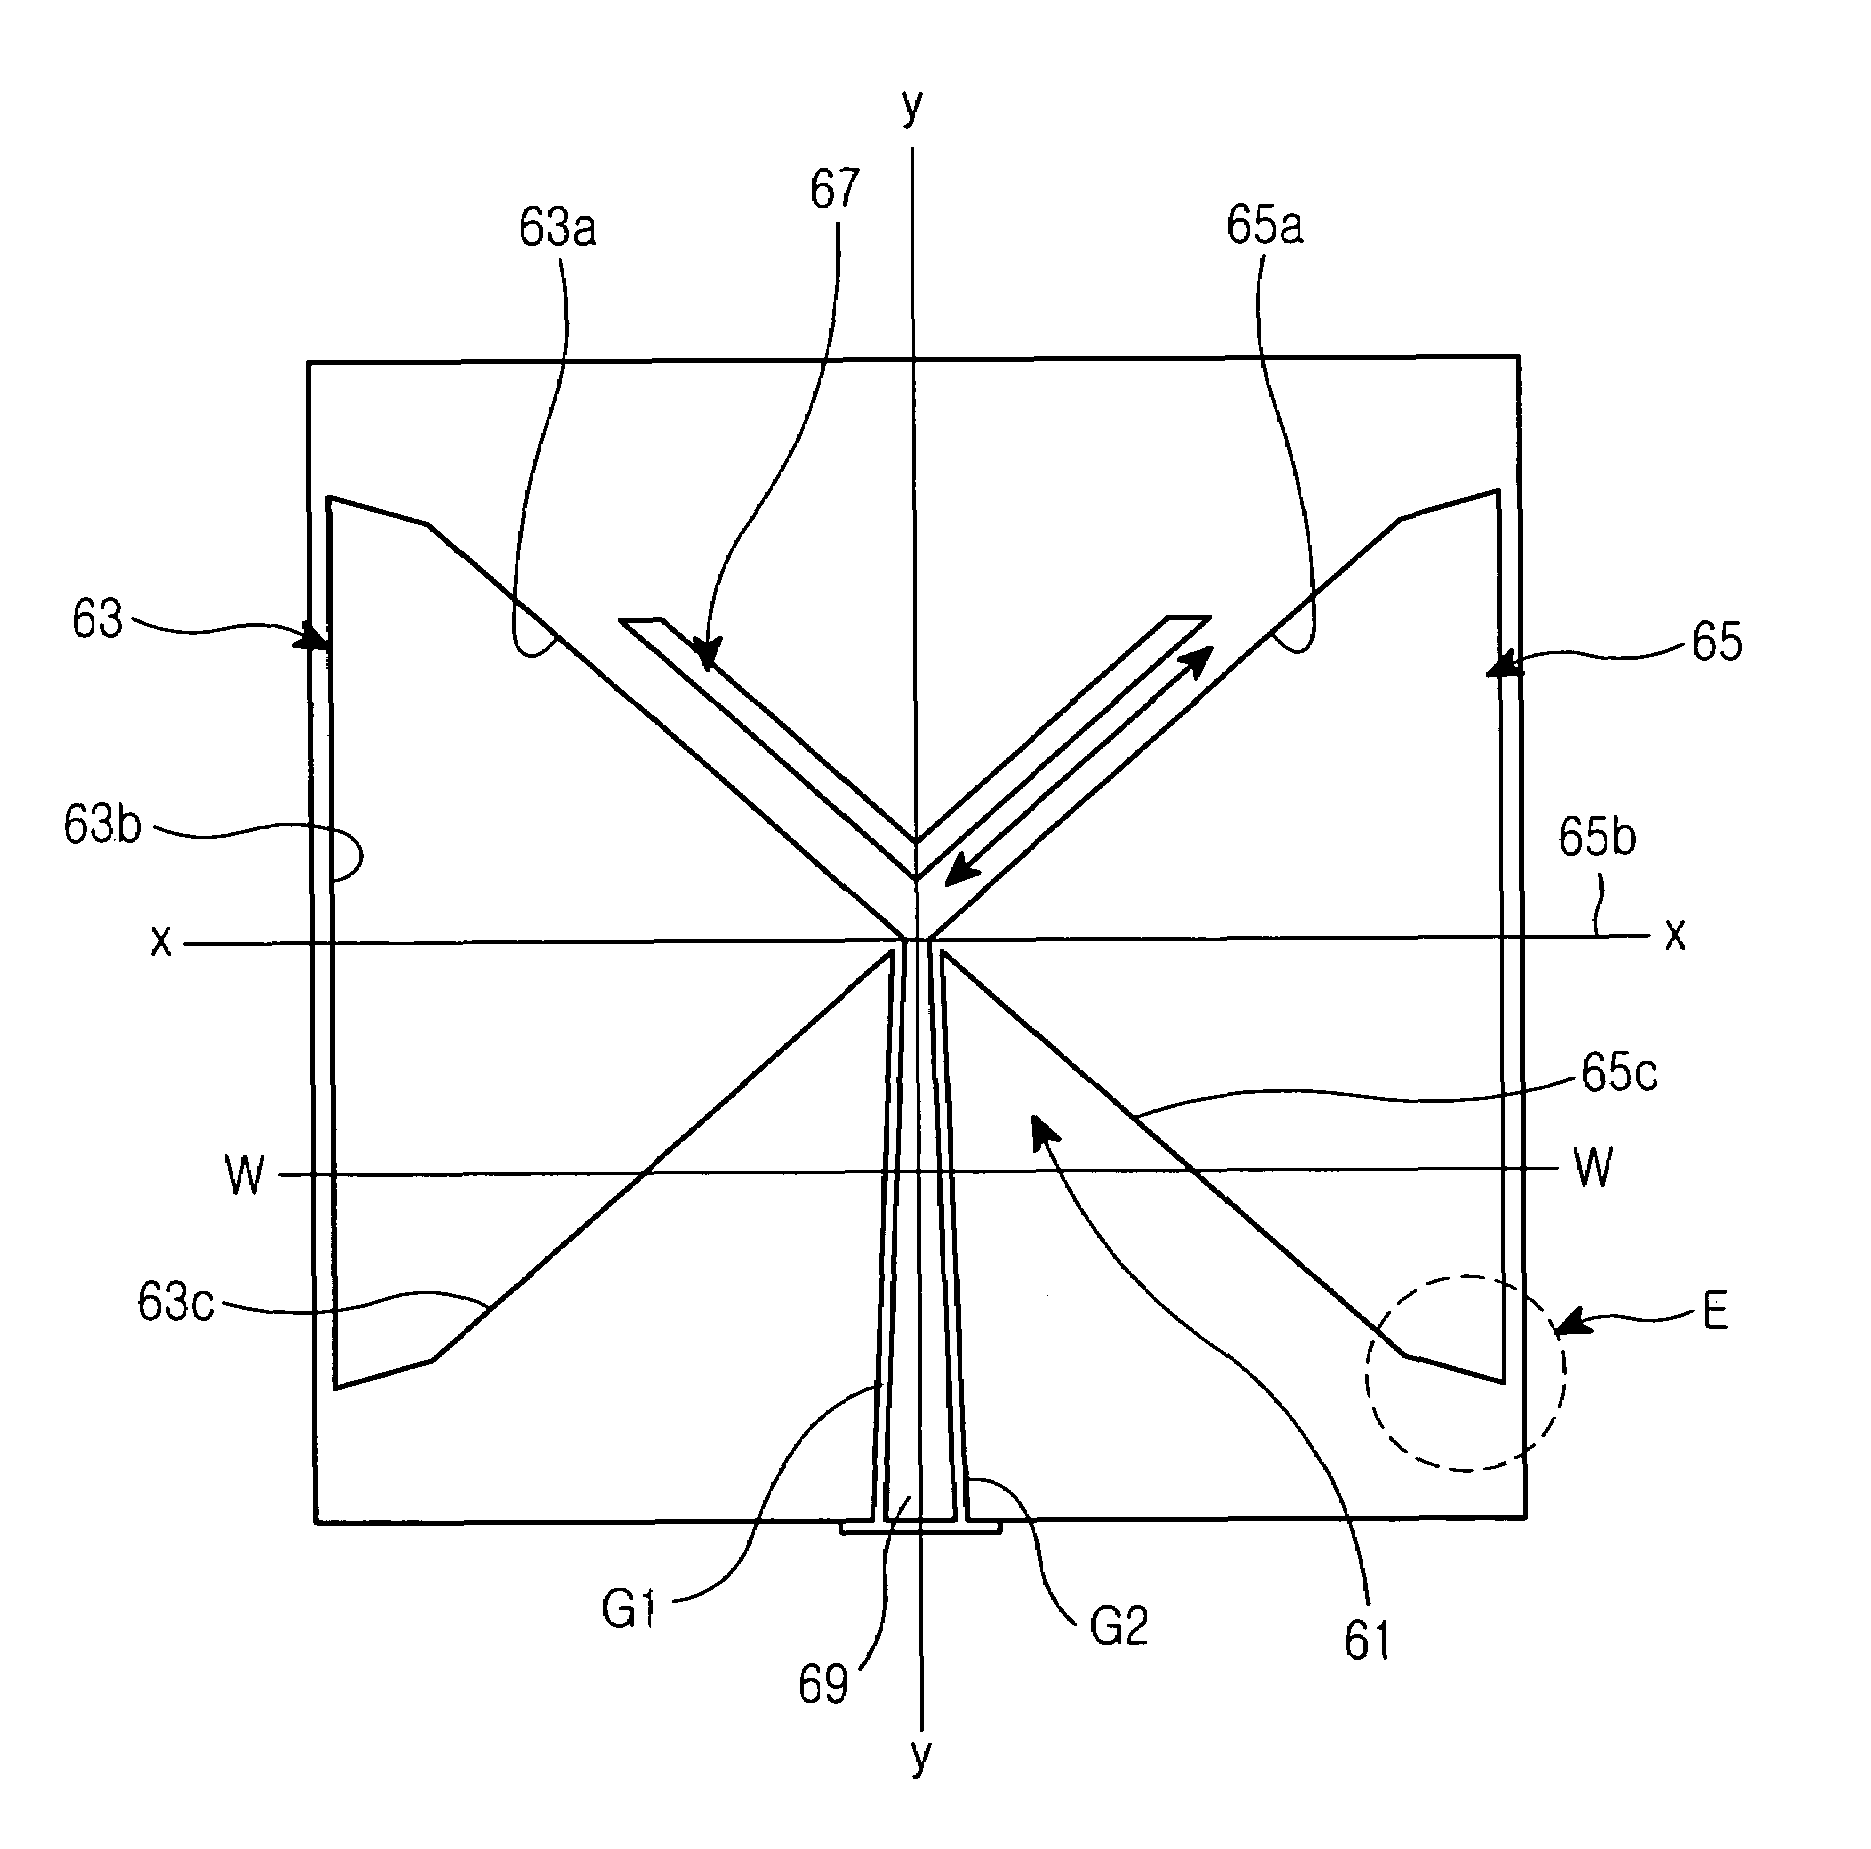 Ultra-wideband planar antenna having frequency notch function